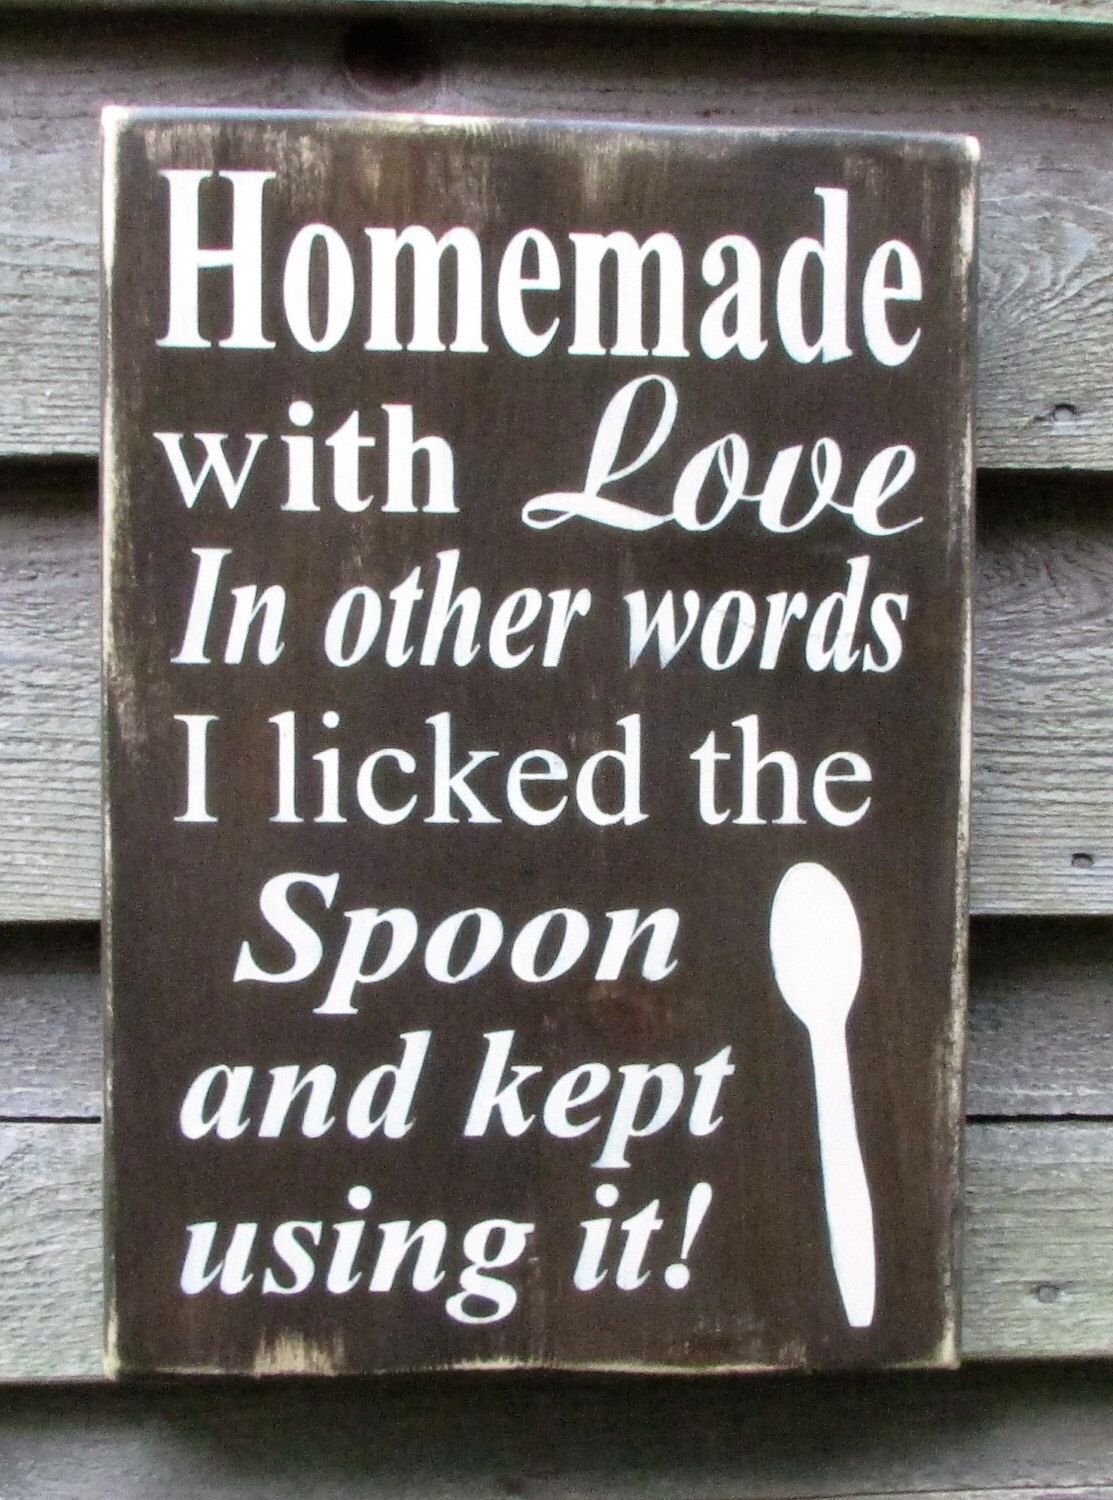 kitchen sign, hand painted wood sign, kitchen decor, funny kitchen sign, primitive home decor, wood sign, home decor, rustic home